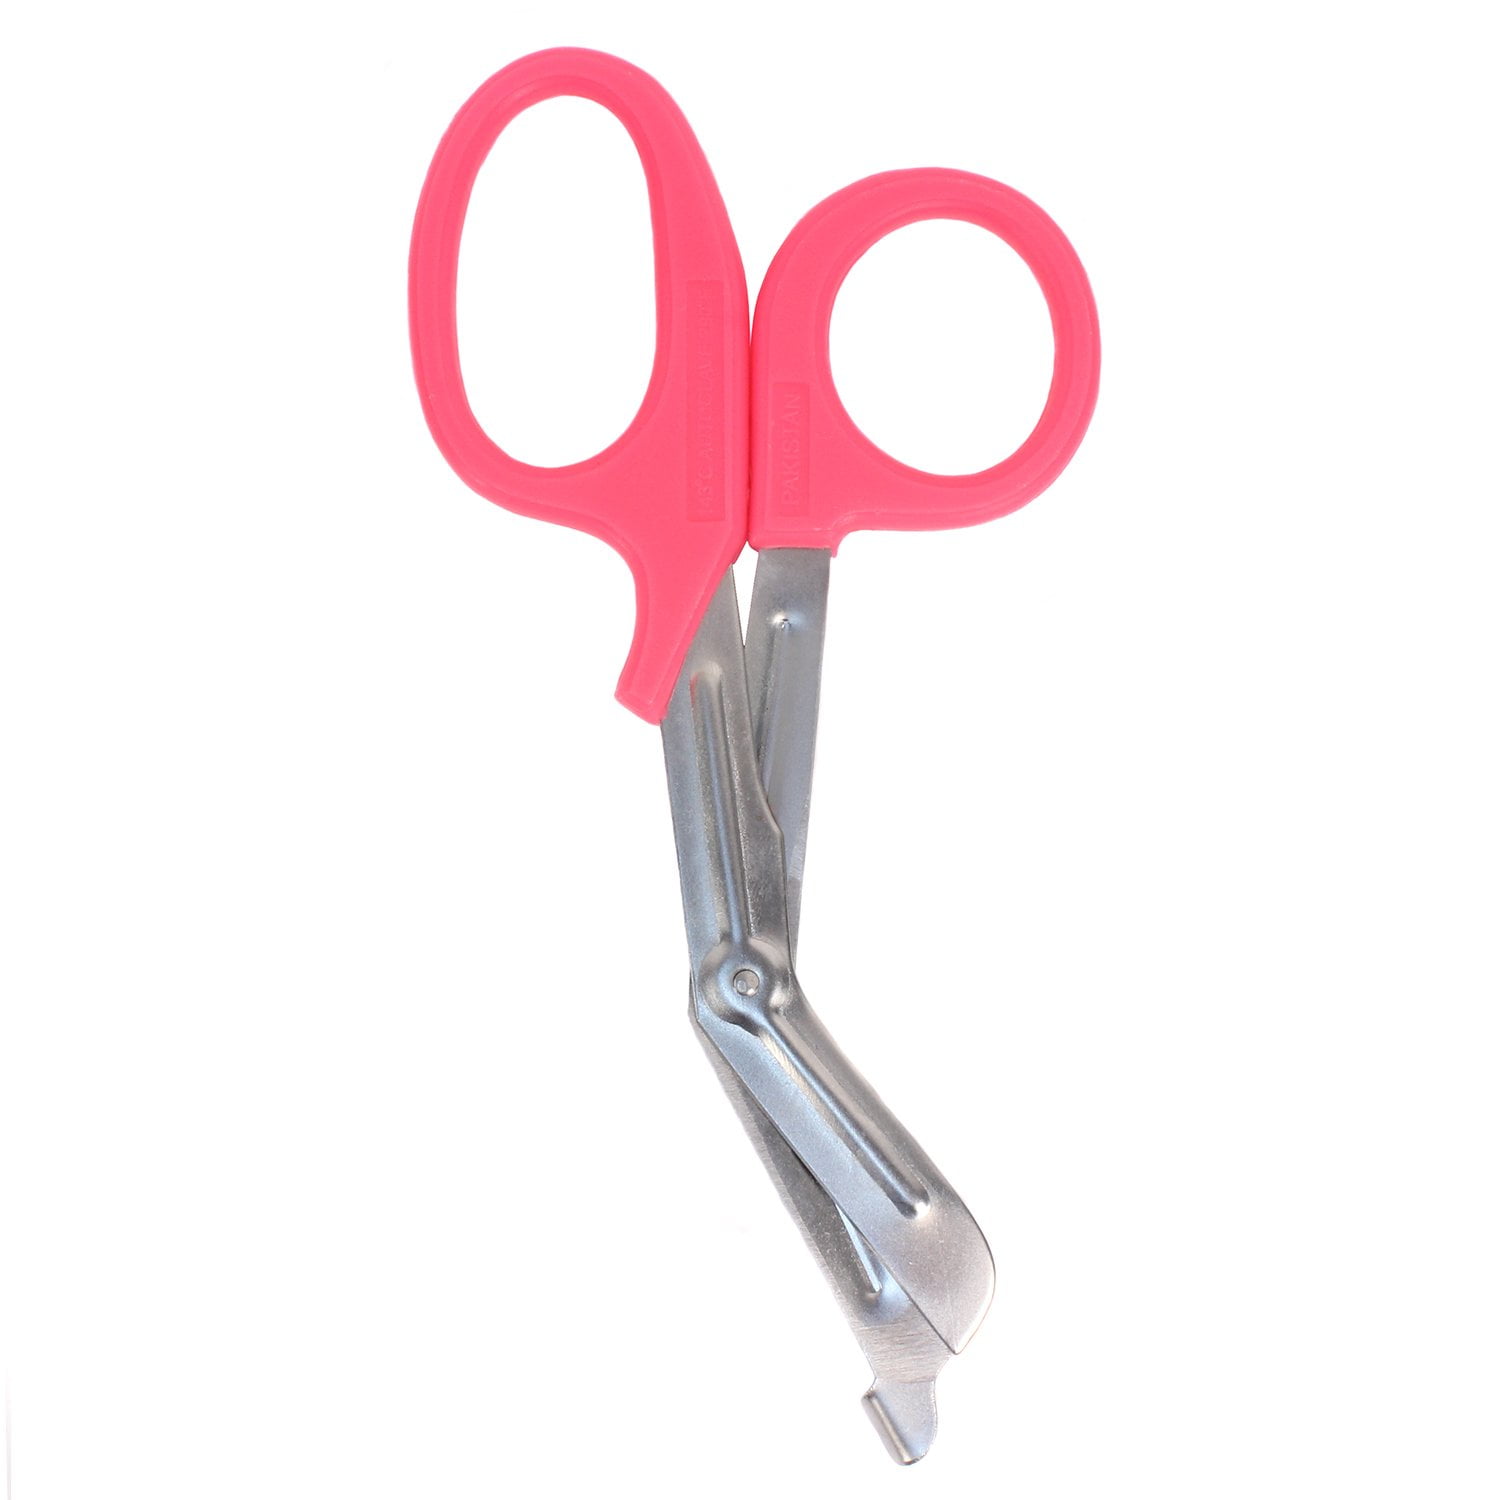 Giant Ribbon Cutting Scissor Set with Red Ribbon Included - 25 Extra Large  Scissors - Heavy Duty Metal Construction for Grand Openings